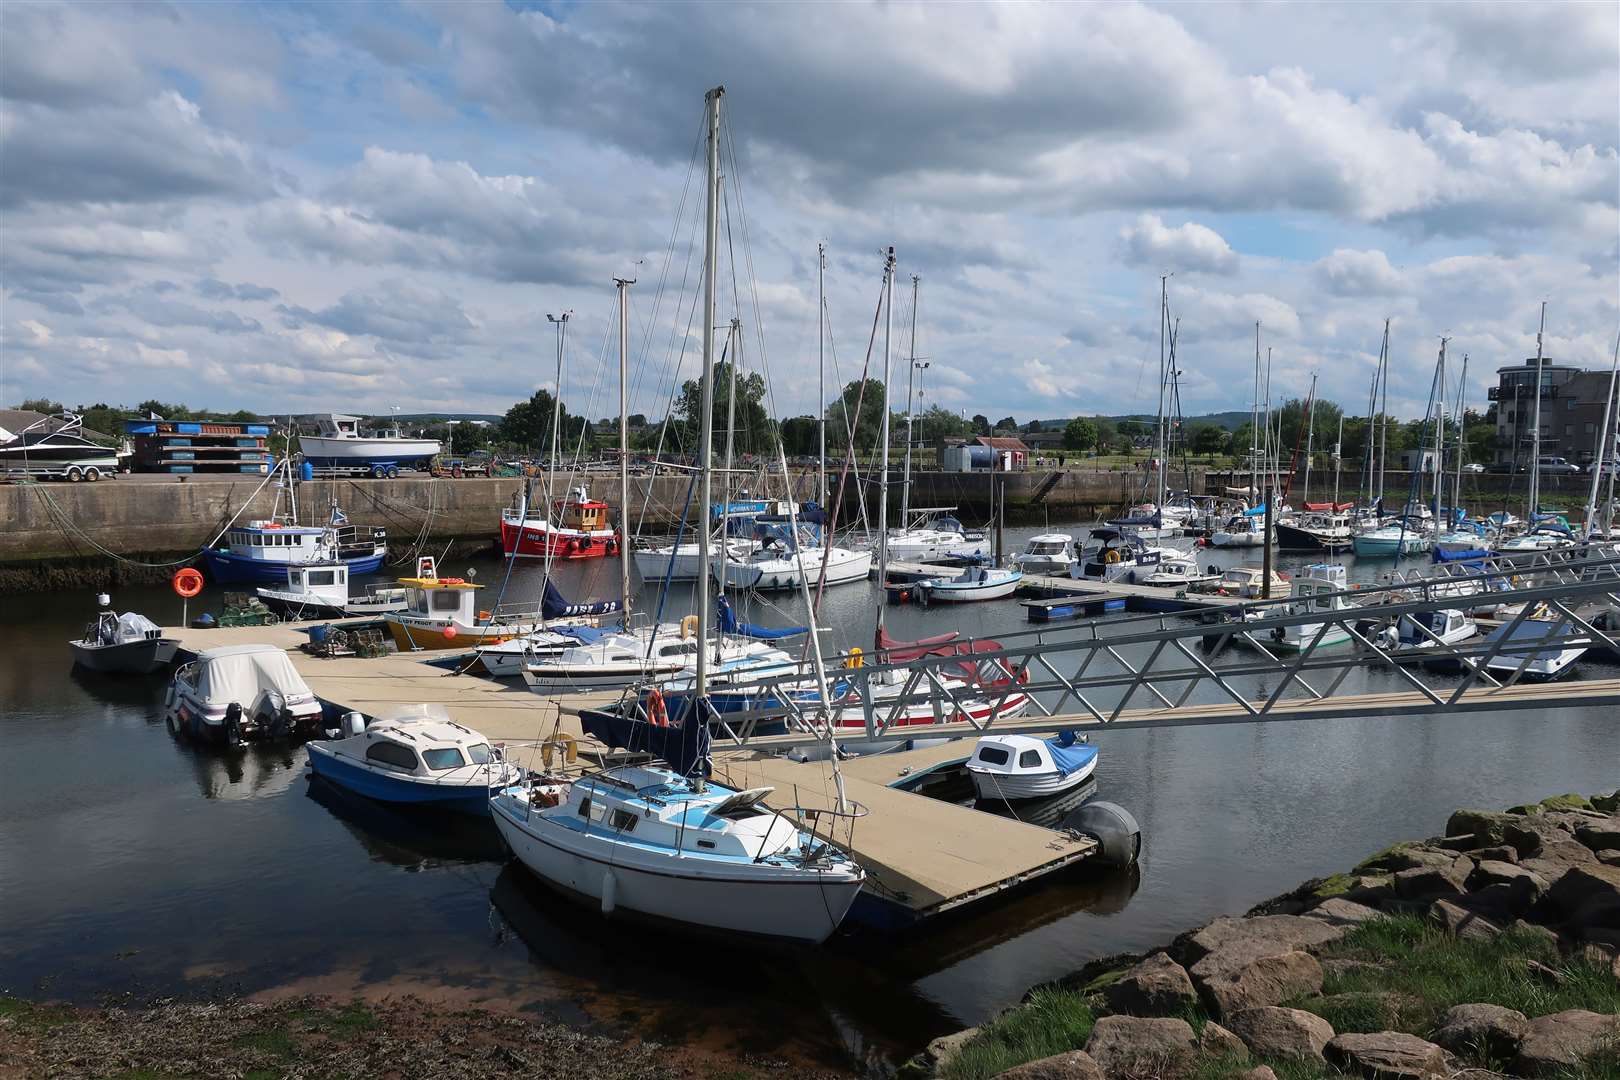 Boats at Nairn harbour.